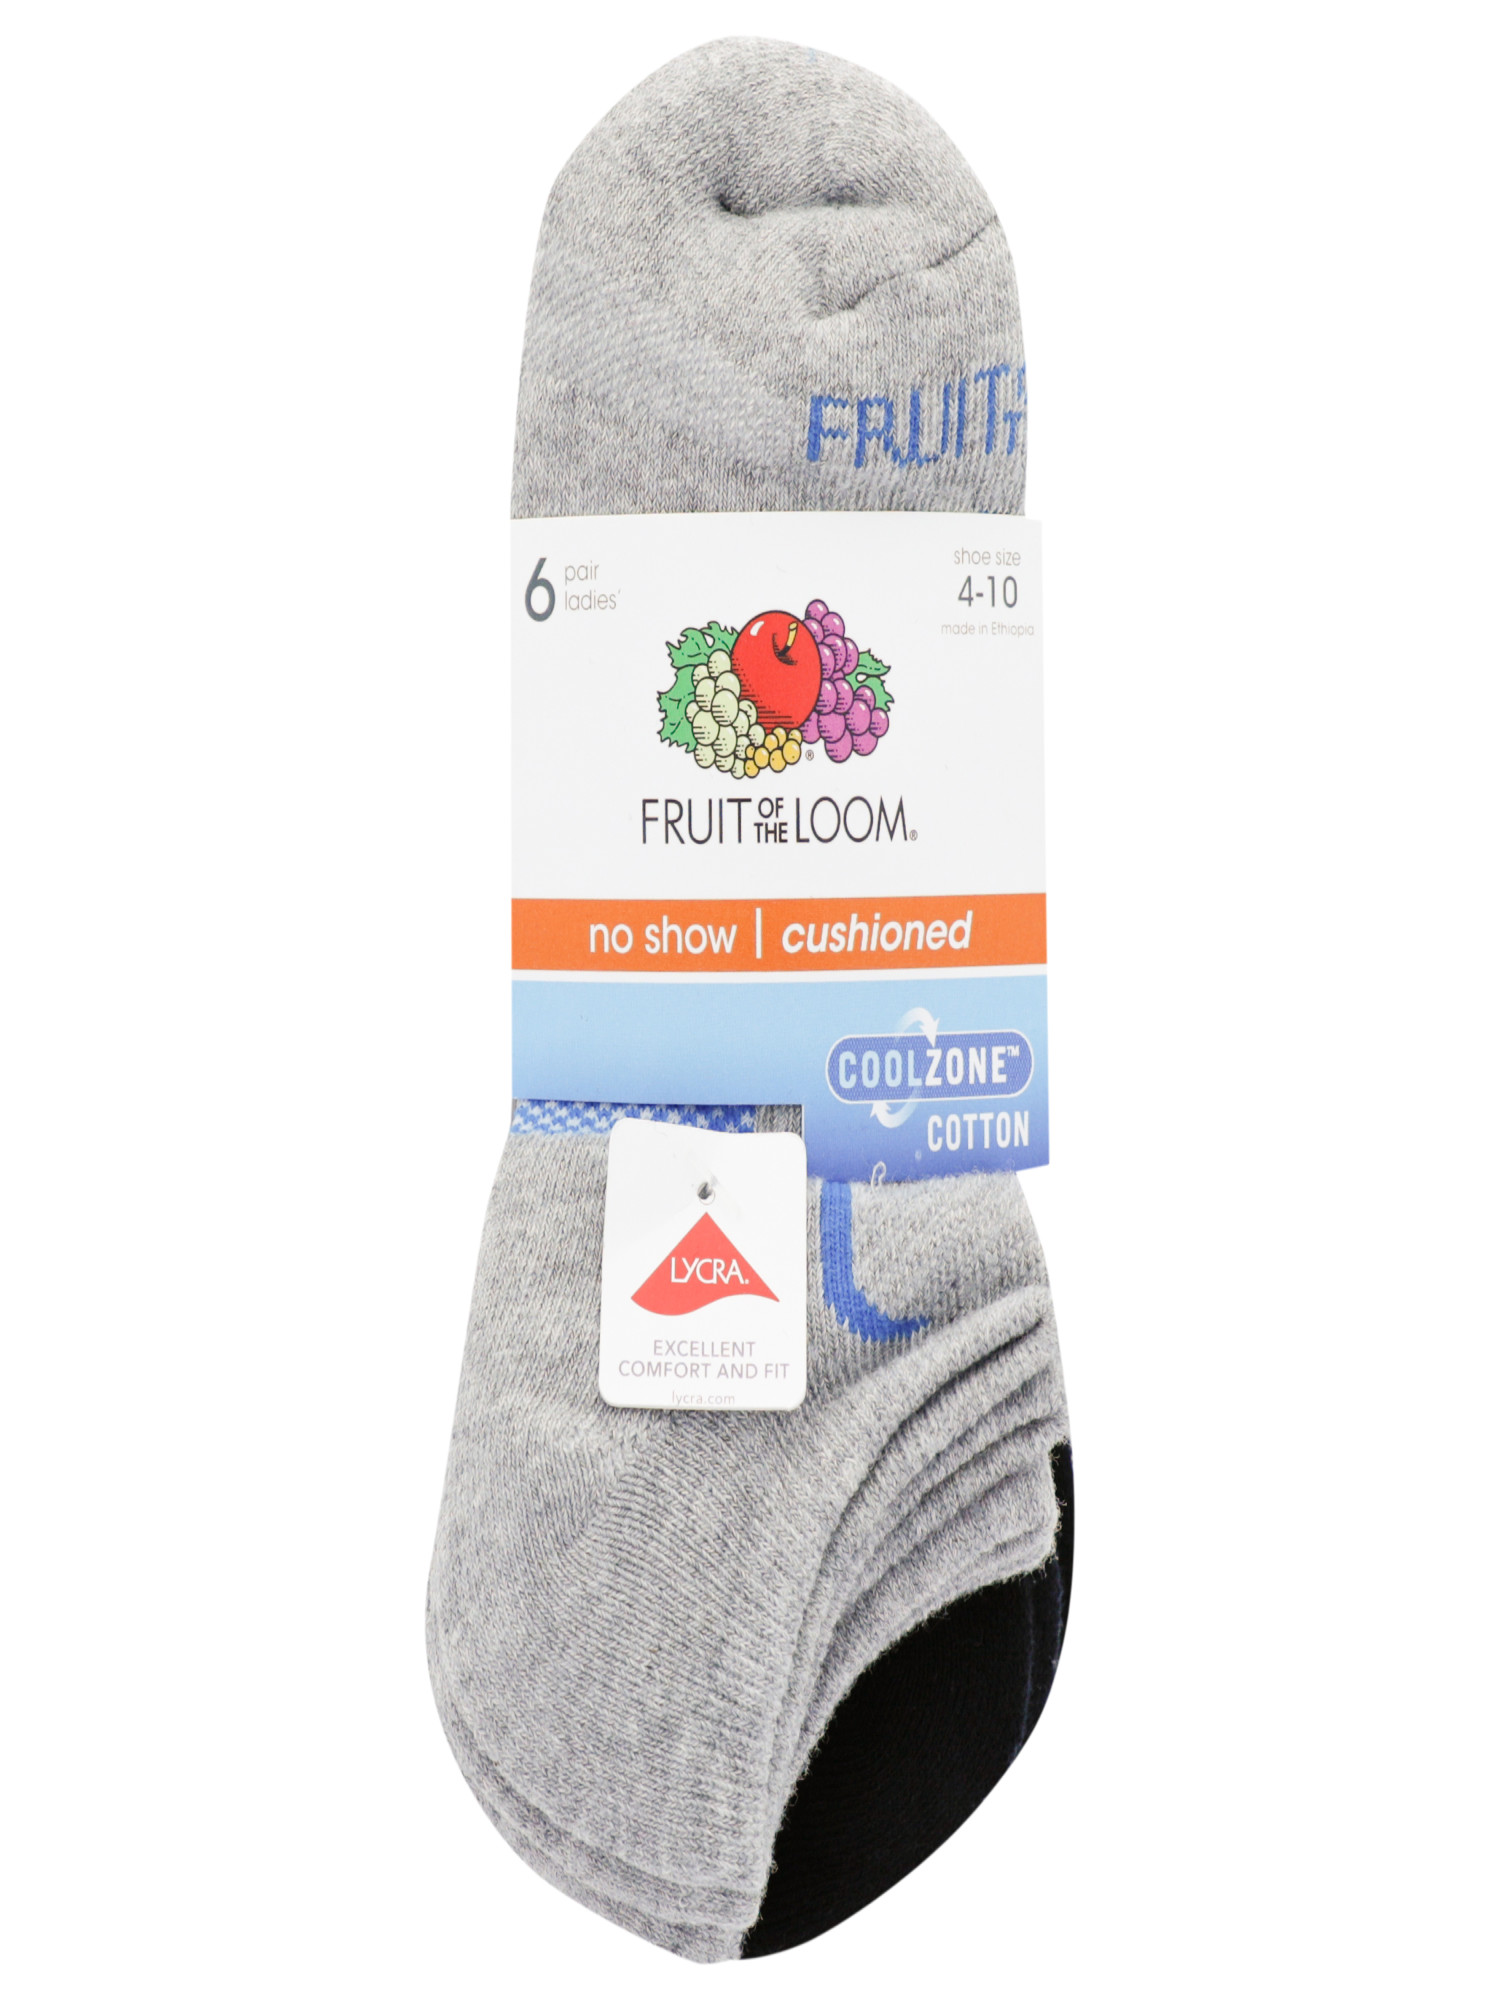 Fruit of the Loom Women's CoolZone Cotton Cushioned No Show Socks, 6-Pack - image 2 of 9